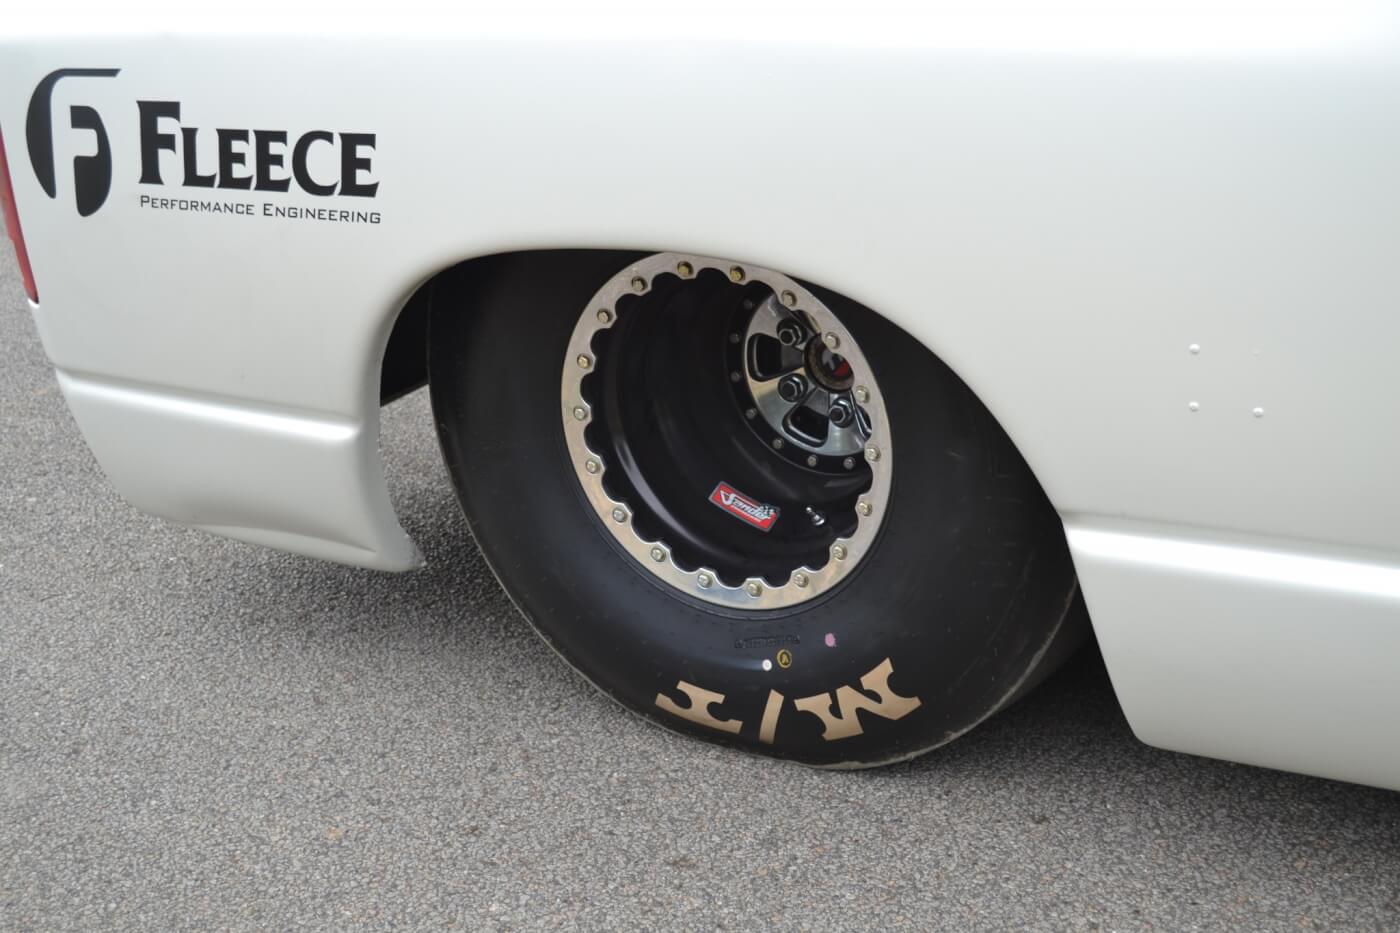 Traction is all-important in drag racing, and a set of large by huge 35x15x15 Mickey Thompson slicks keep the rear of the truck planted to the asphalt. The rear brakes are also from Wilwood, and are dual-caliper versions. Wheels are large 15x12-inch pieces from Sanders. 